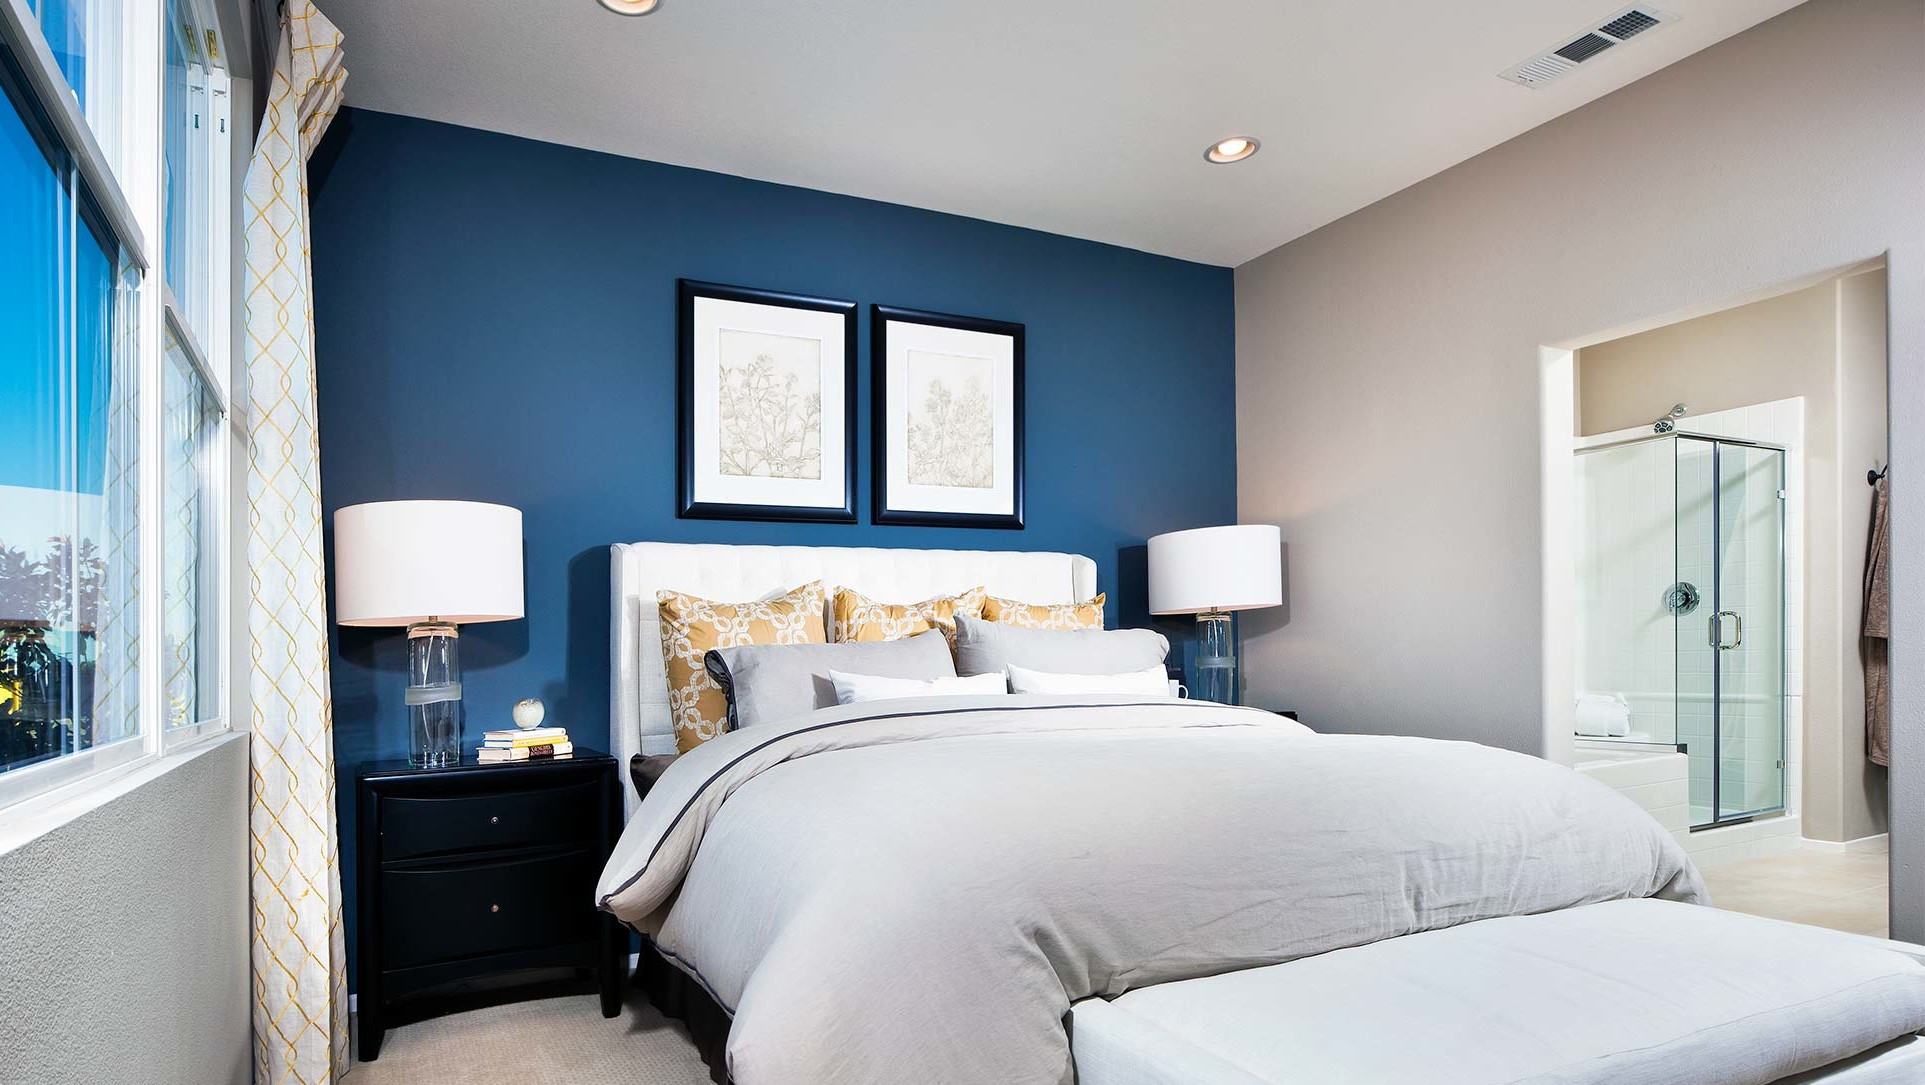 Bedroom Accent Wall Colors
 You re Doing It Wrong Painting an Accent Wall